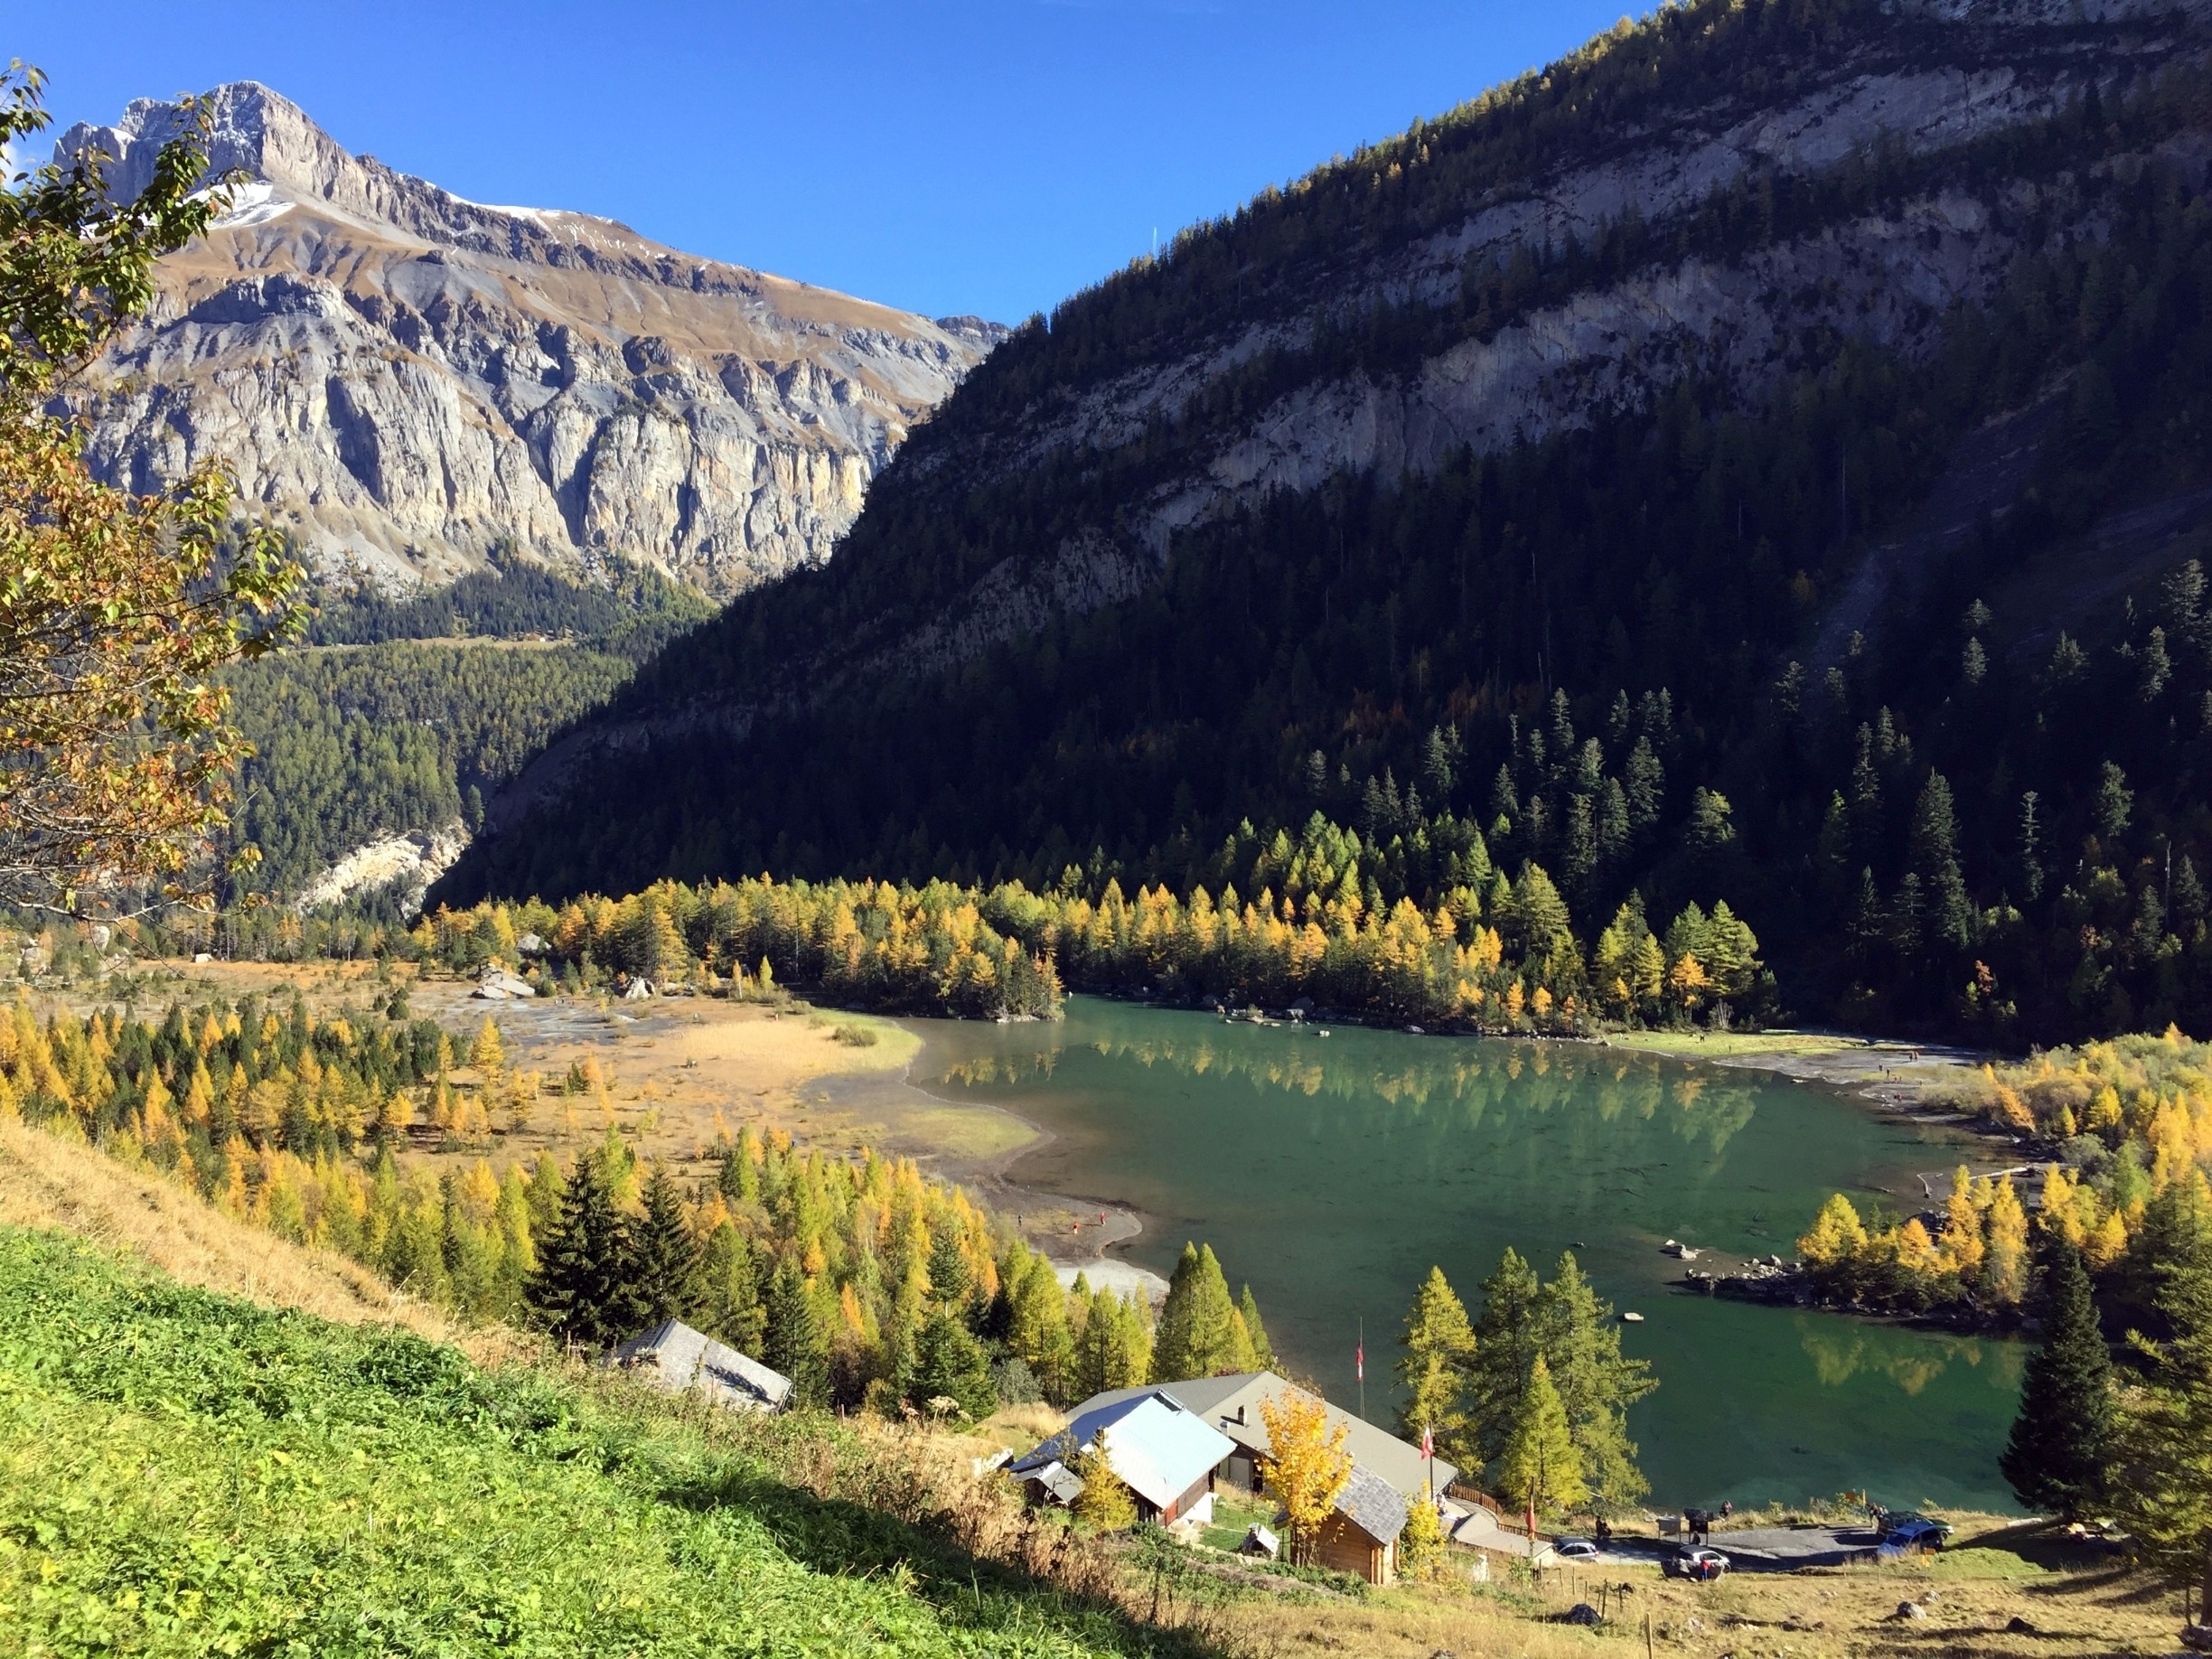 Autumn colours on Derborence lake.
Multiple hiking opportunities in the area, including a walk to the Rambert mountain hut. Derborence is situated in a protected natural park, where you can observe the "Gipaete Barbu" as well as mountain goats.

#Valais #Switzerland #hiking #LifeatExpedia #nature #lake